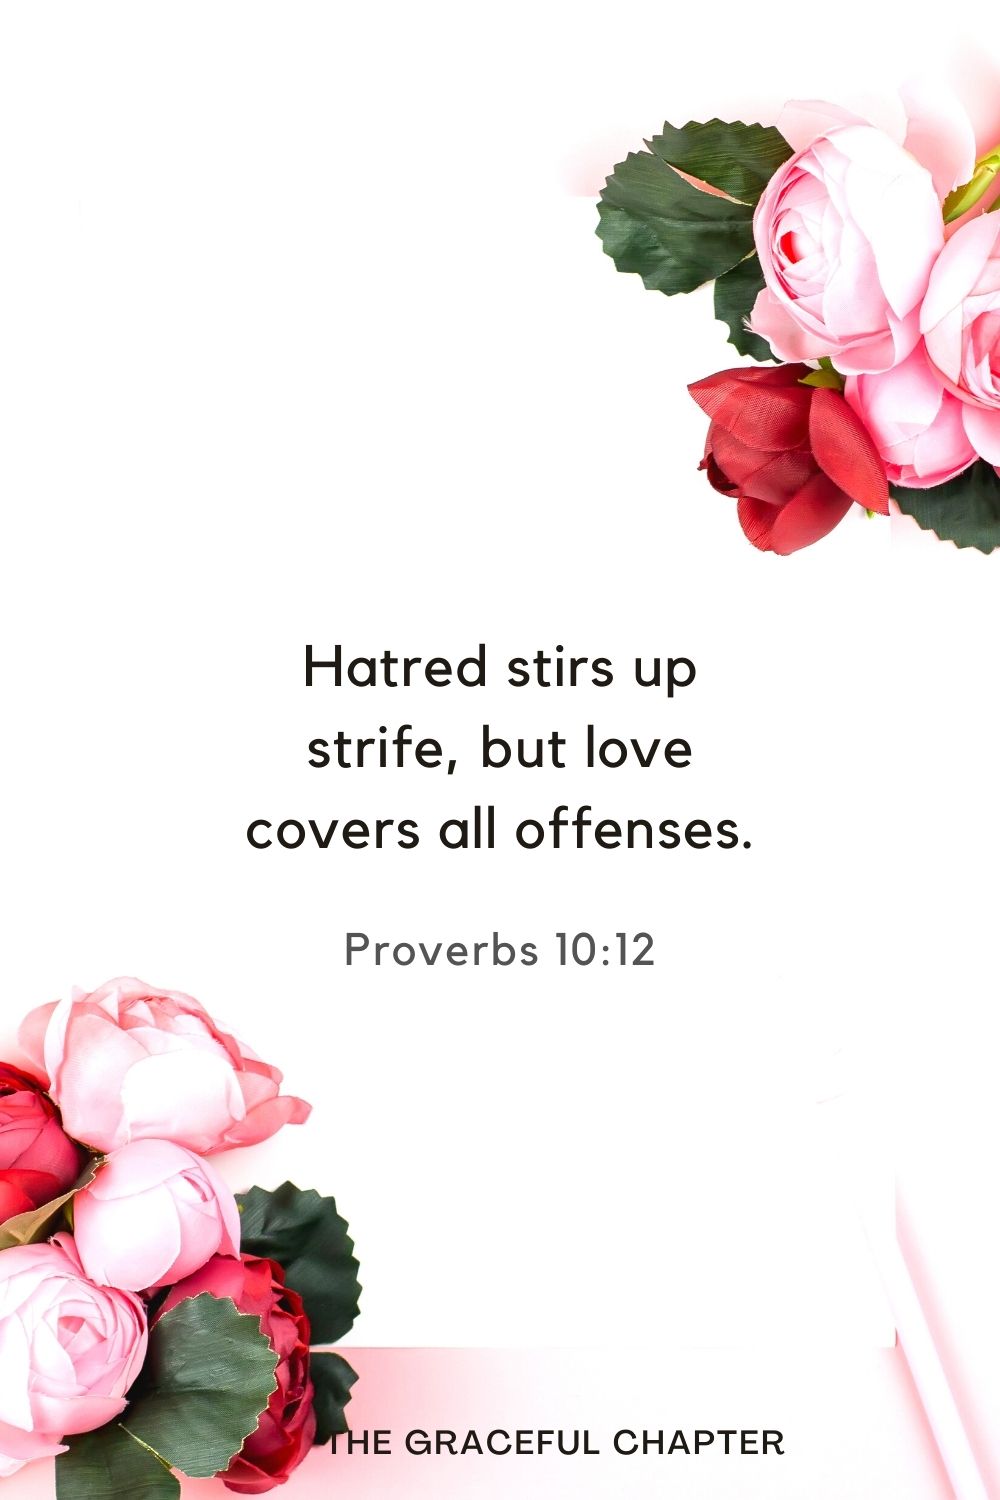 Hatred stirs up strife, but love covers all offenses. Proverbs 10:12